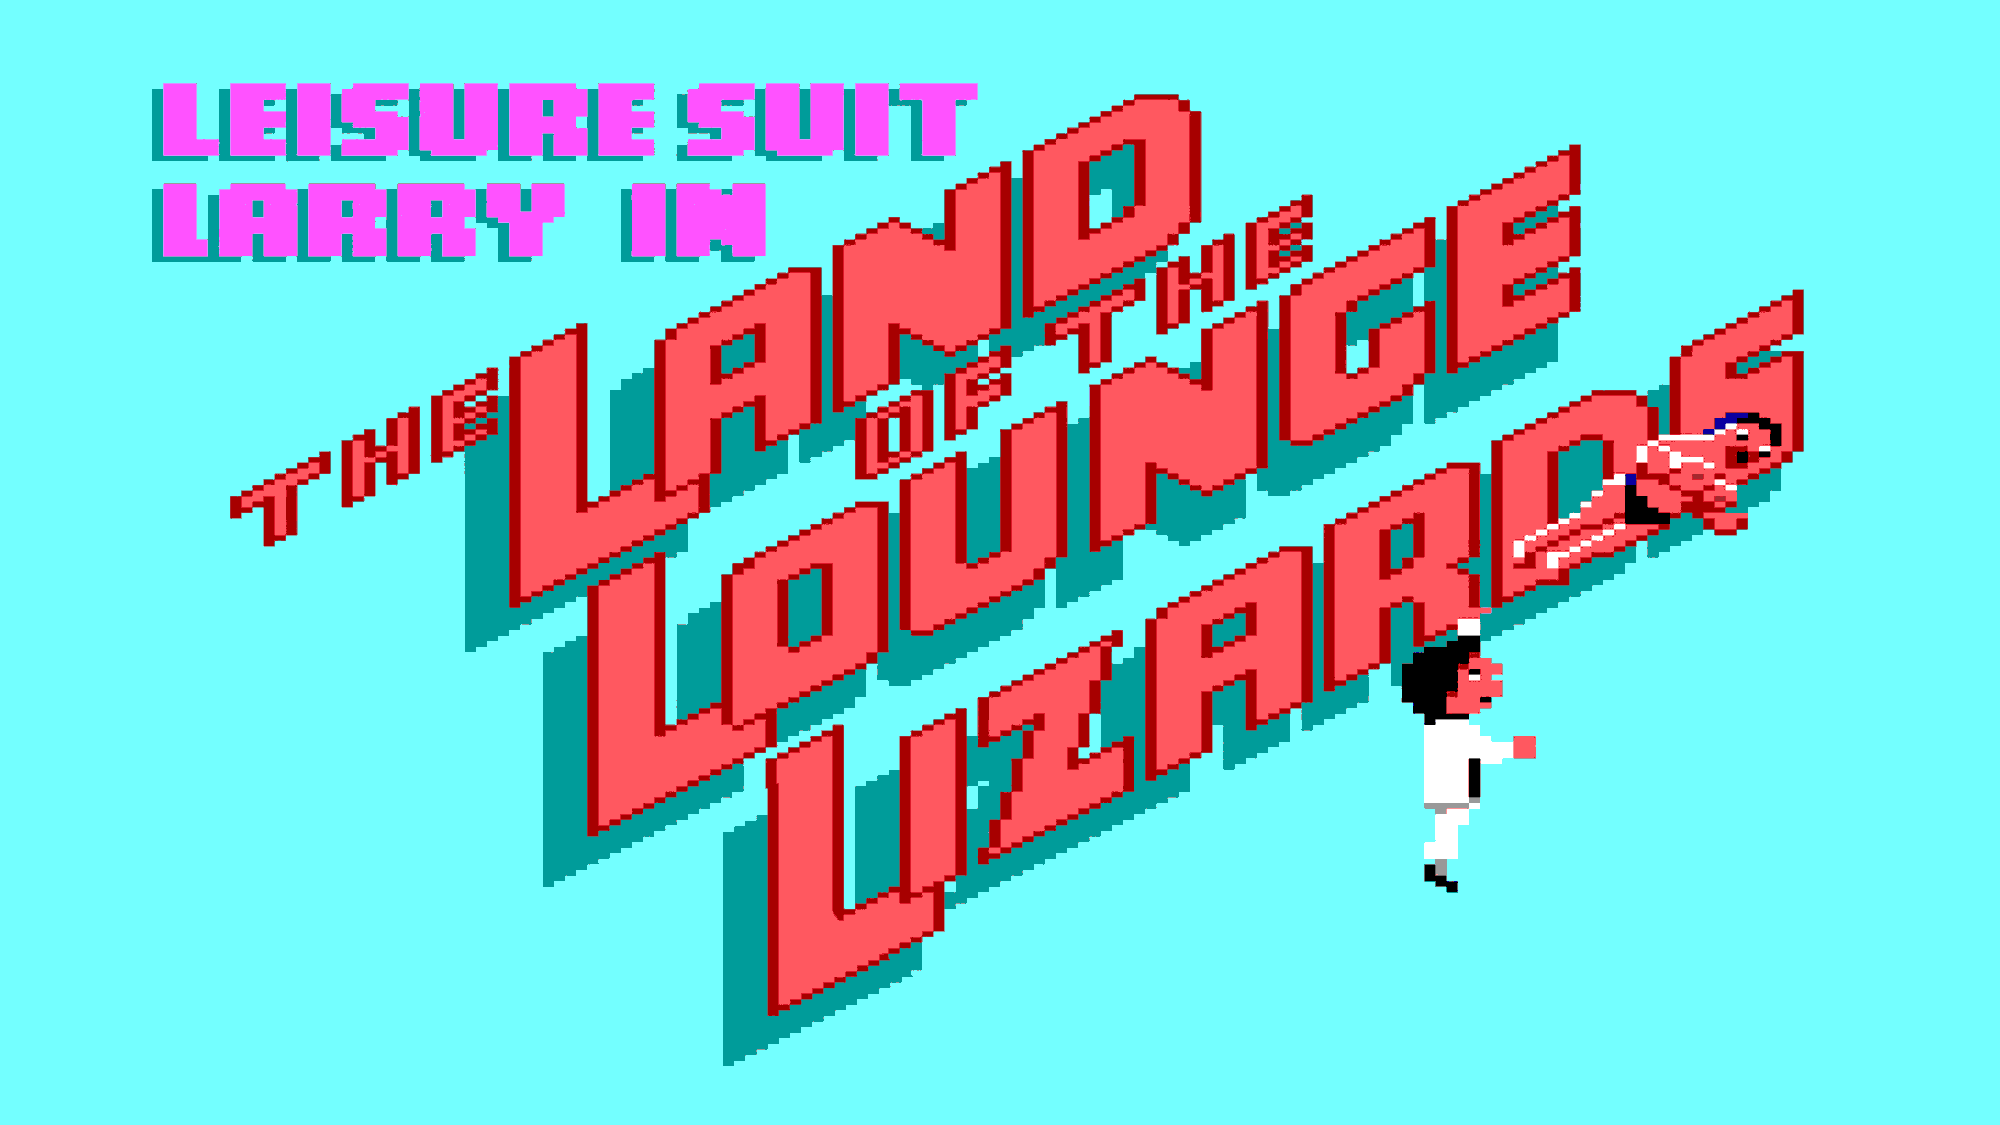 12 Things You Probably Didn't Know About The Leisure Suit Larry Games